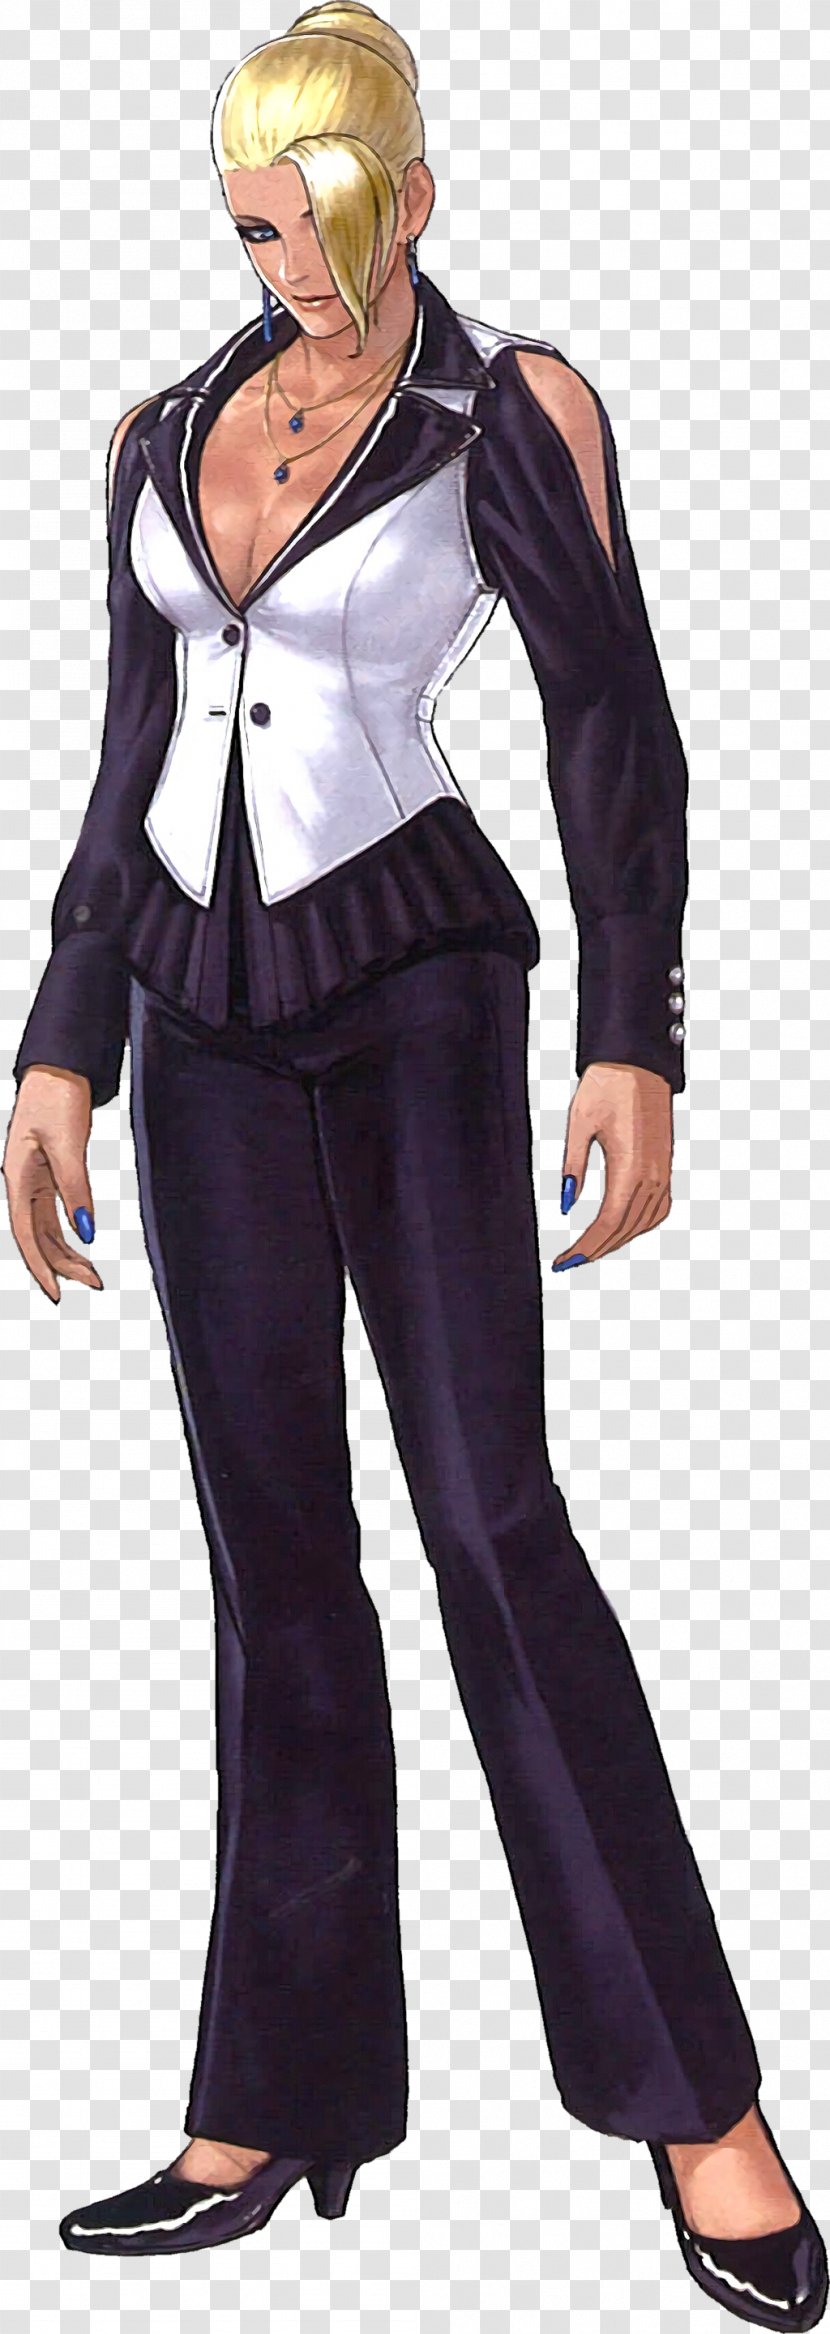 The King Of Fighters XIV '96 Vice '98 Iori Yagami - Cartoon - Lost Transparent PNG